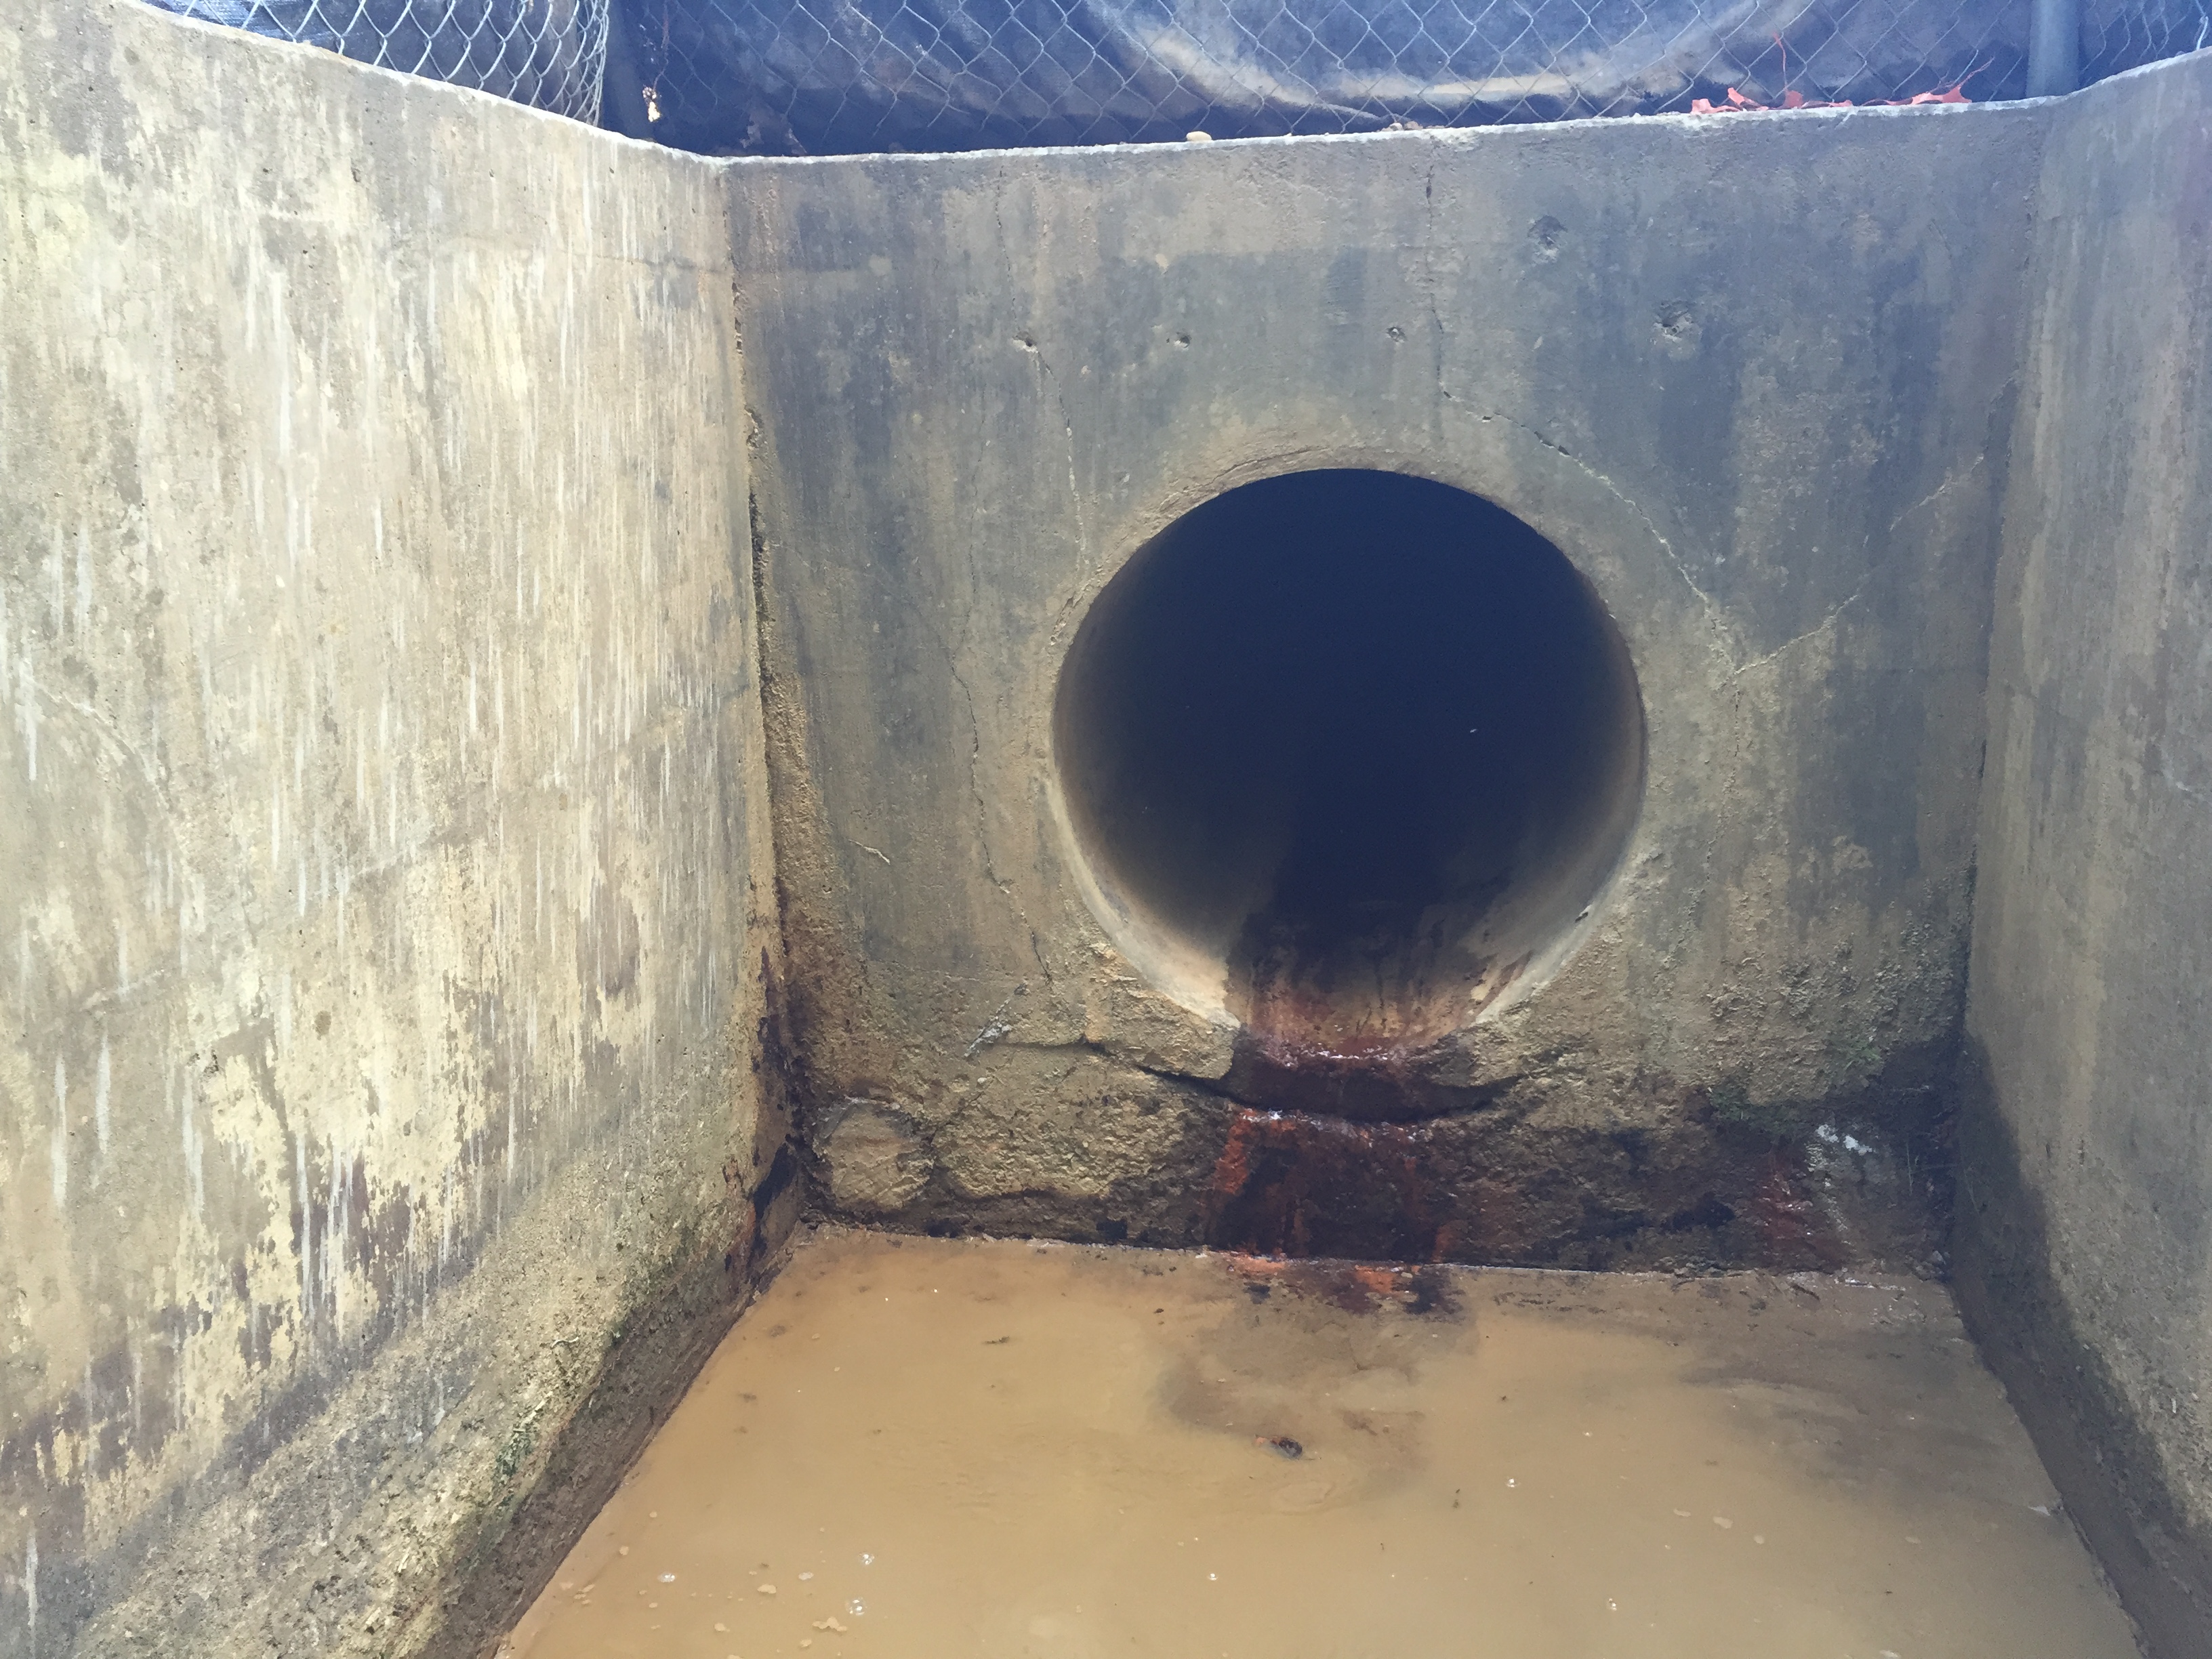 Dam Outfall Pipe Seep Grouting - CJGeo CJGeo